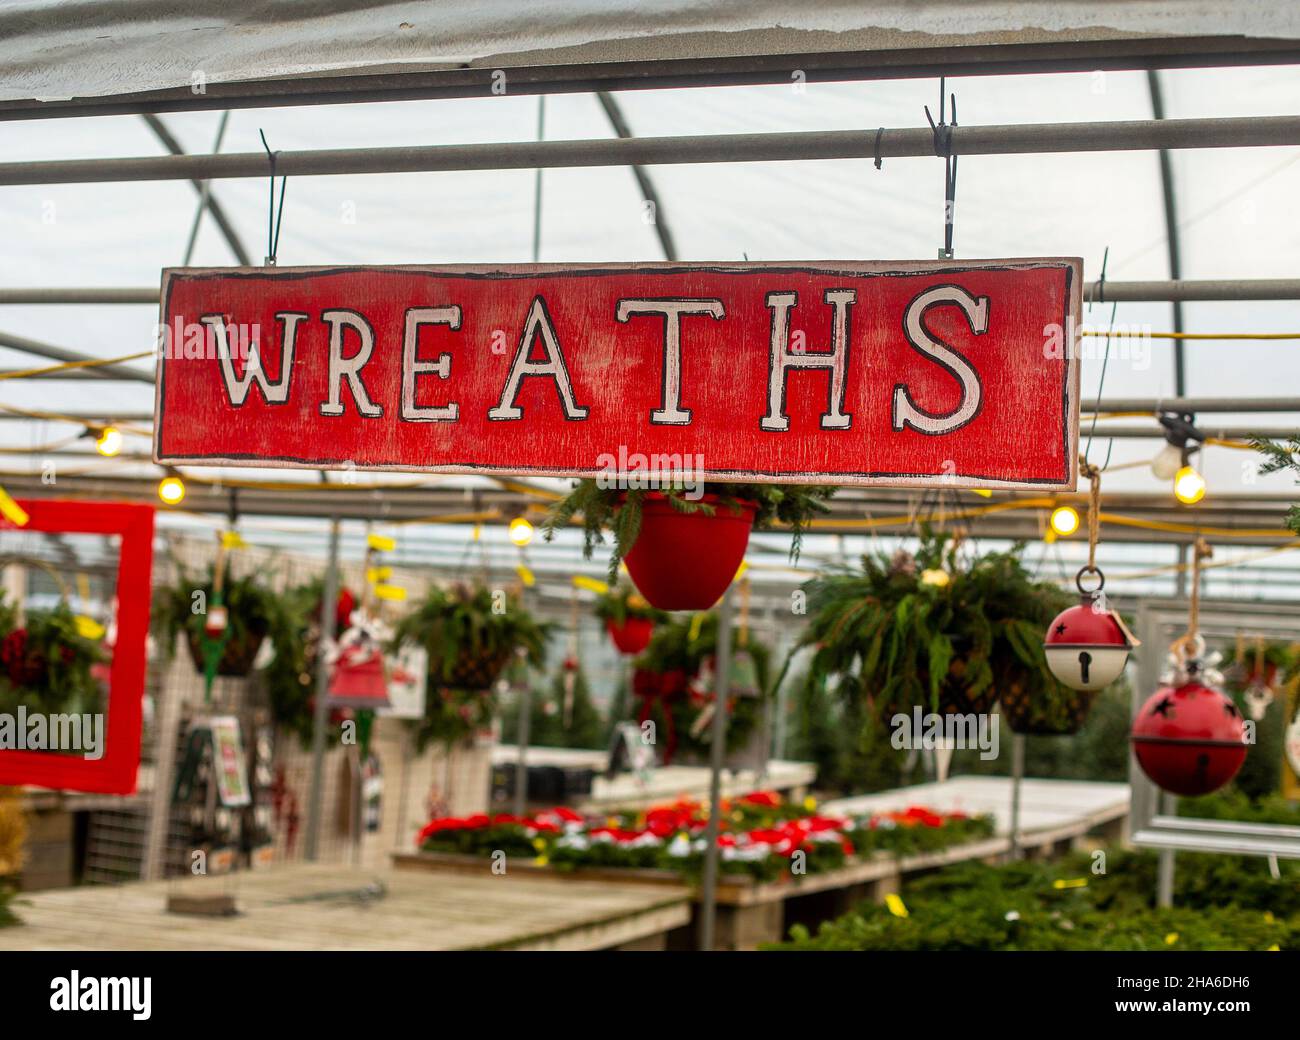 A wreath sign at a nursery selling Christmas decorations Stock Photo